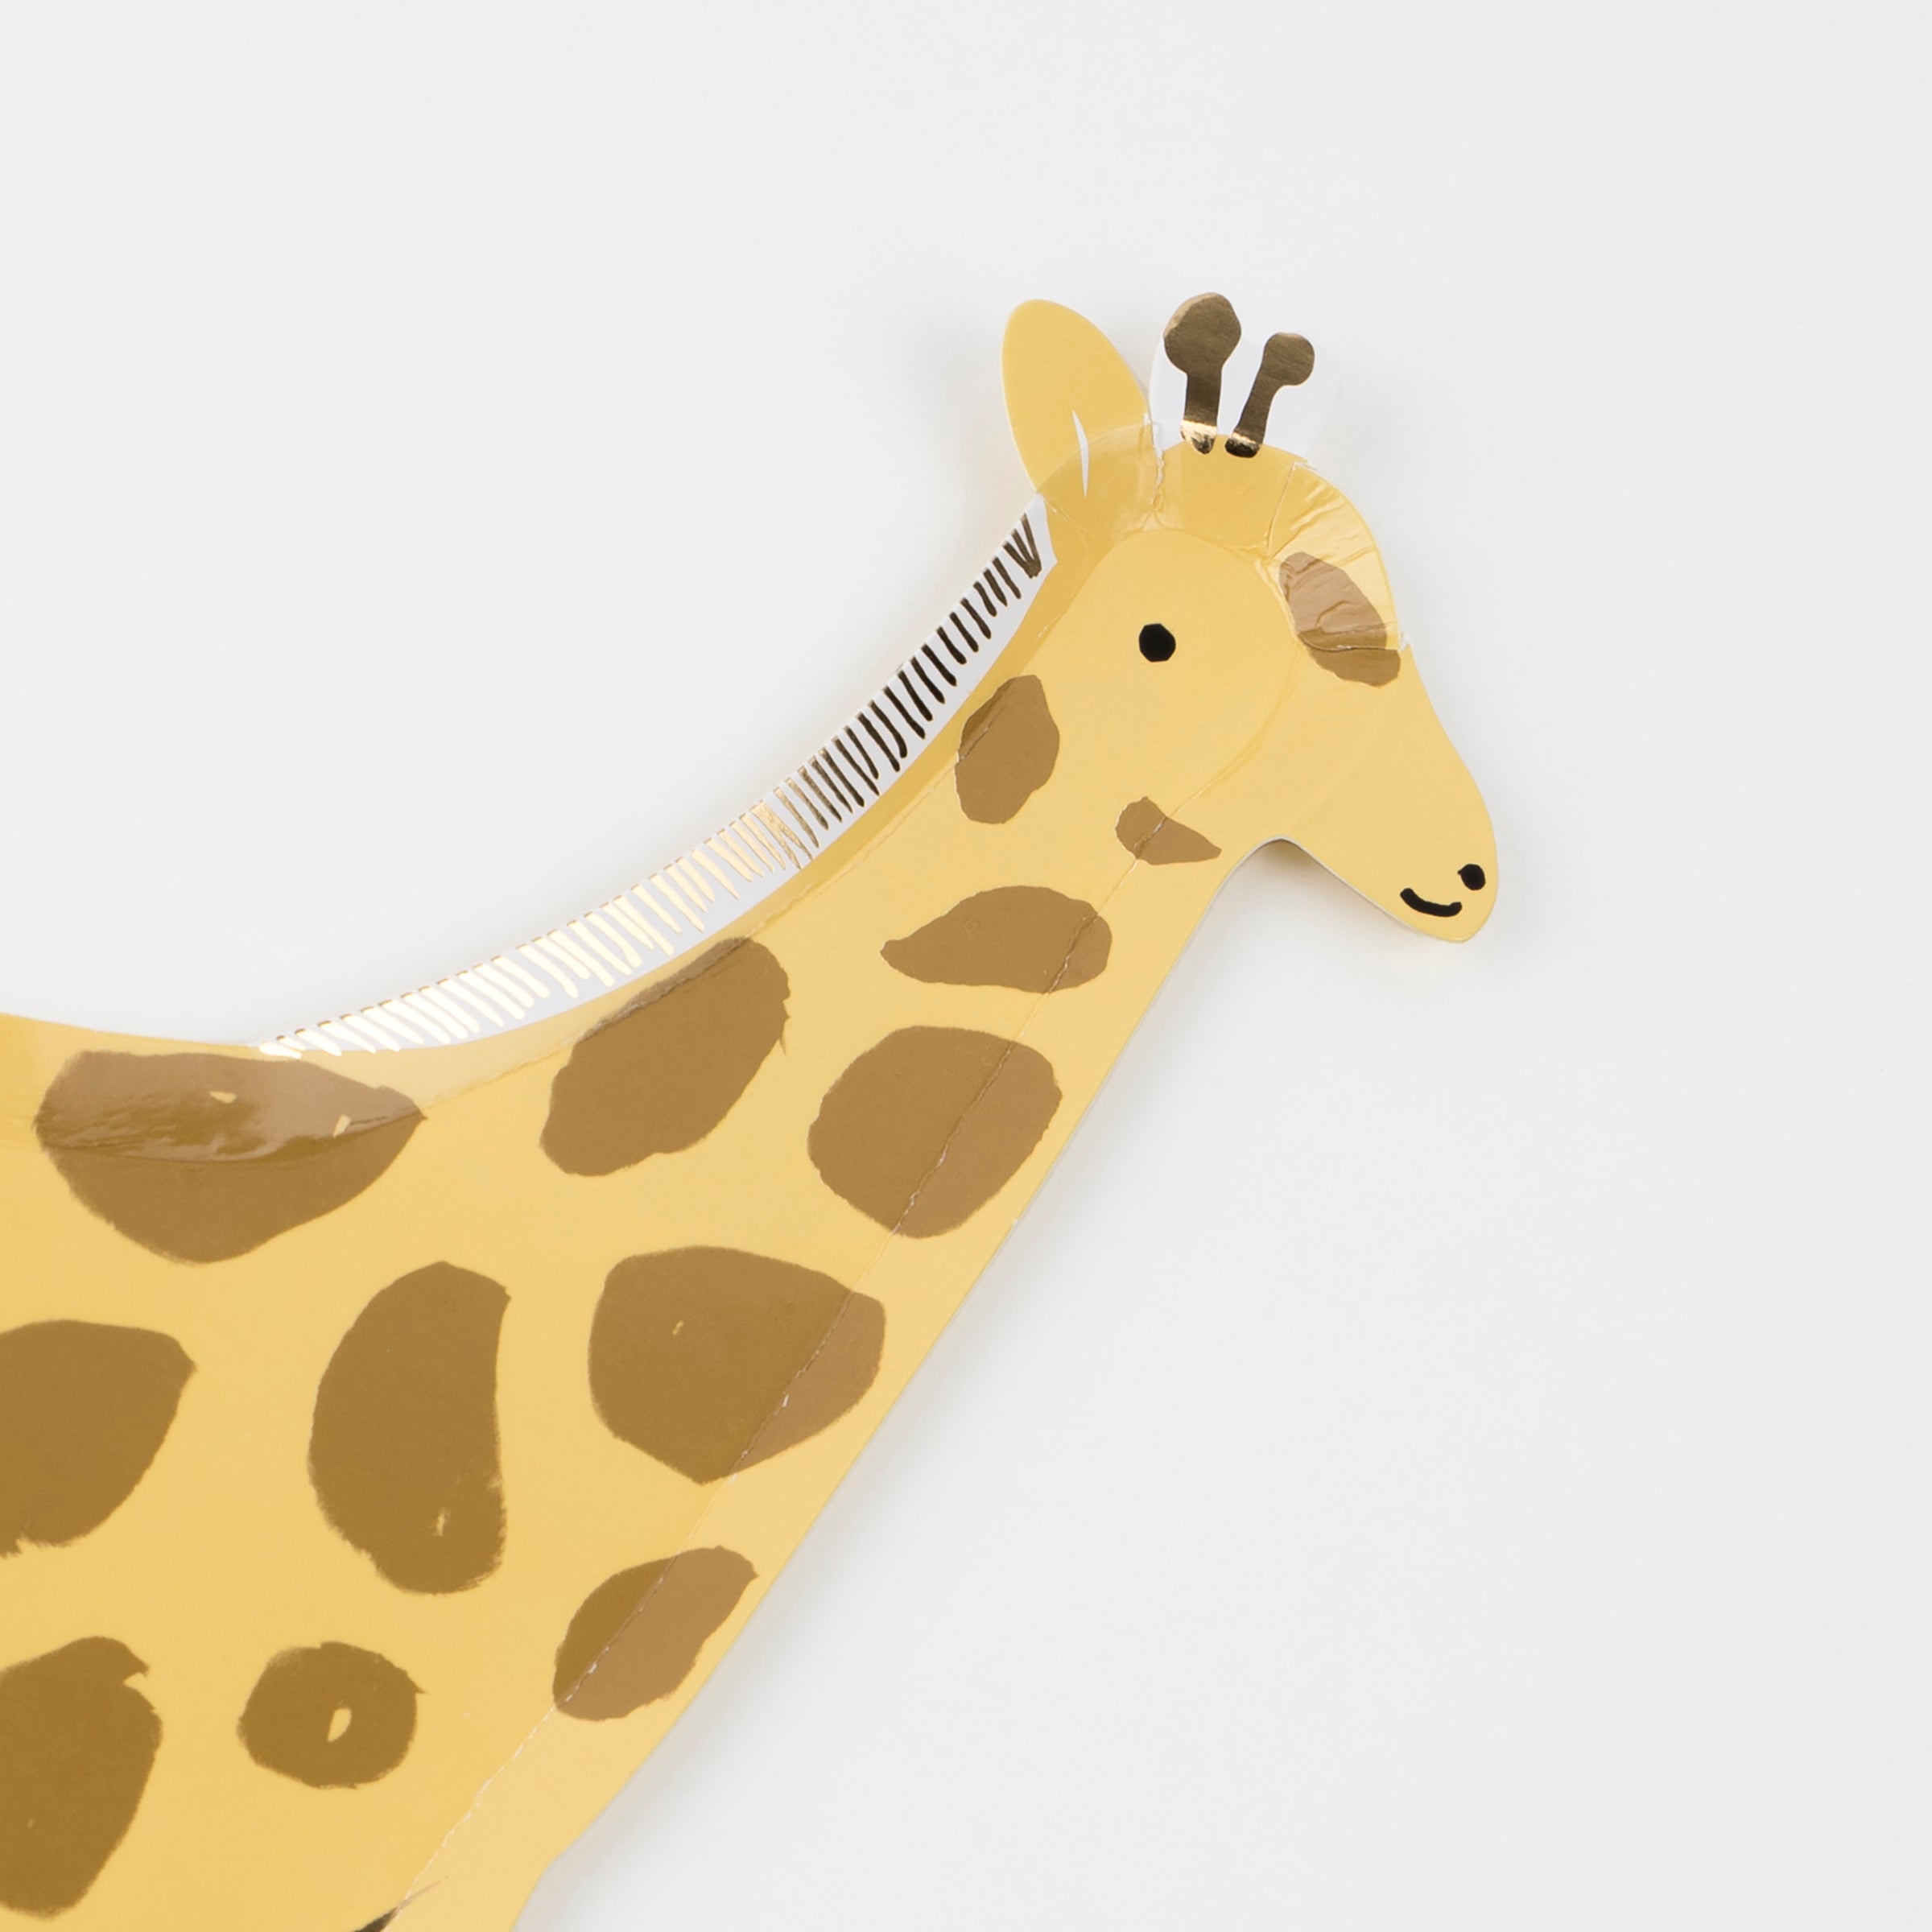 If you're having a safari birthday party you'll love our paper plates in the shape of giraffes with shiny gold foil details.